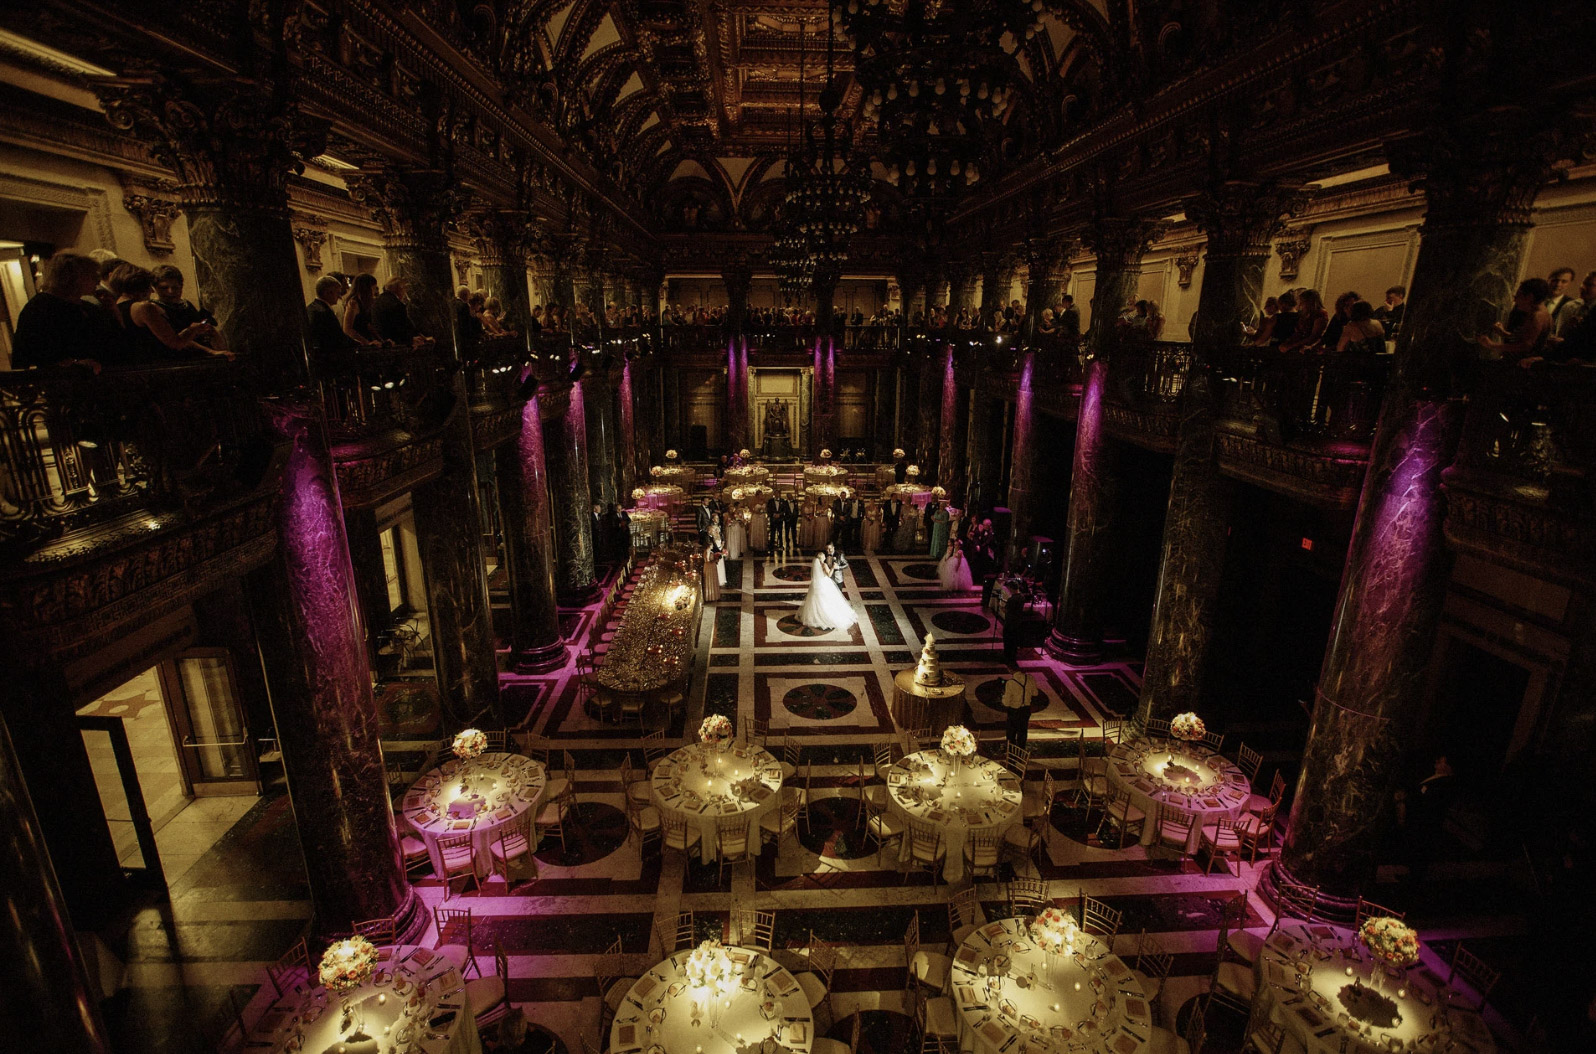 an image of a dimly lit wedding venue from the balcony